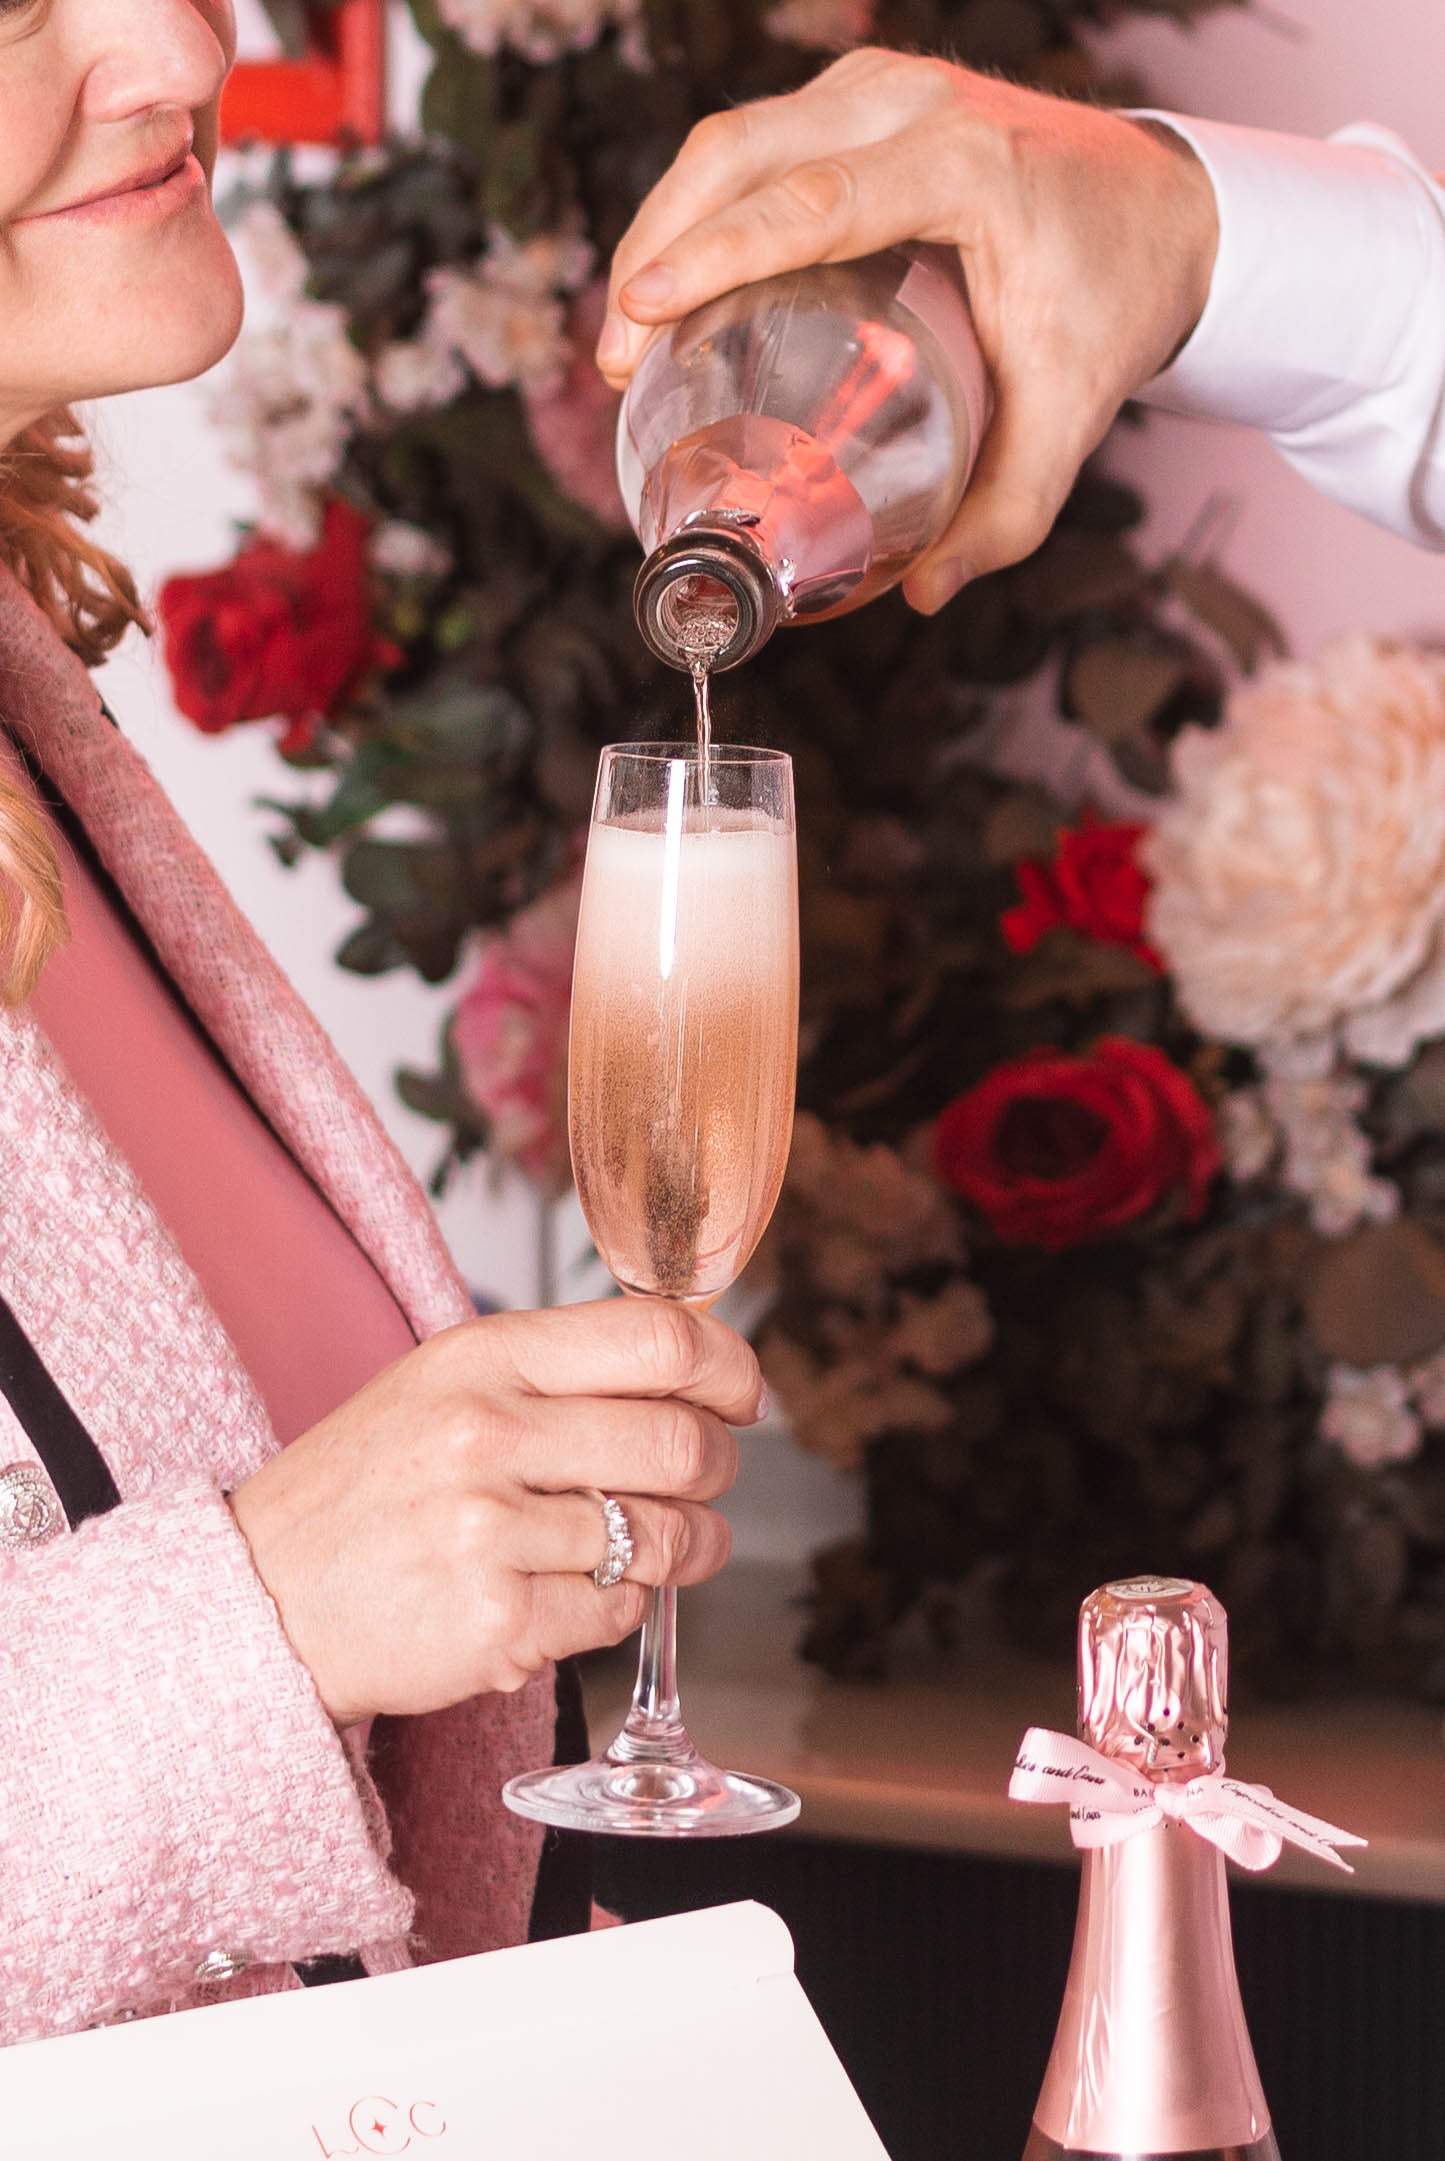 Seduce tus sentidos. The sweet kiss of a cupcake becomes magical when paired with a sparkling sip of our signature Brut Rosé or Brut Cava.